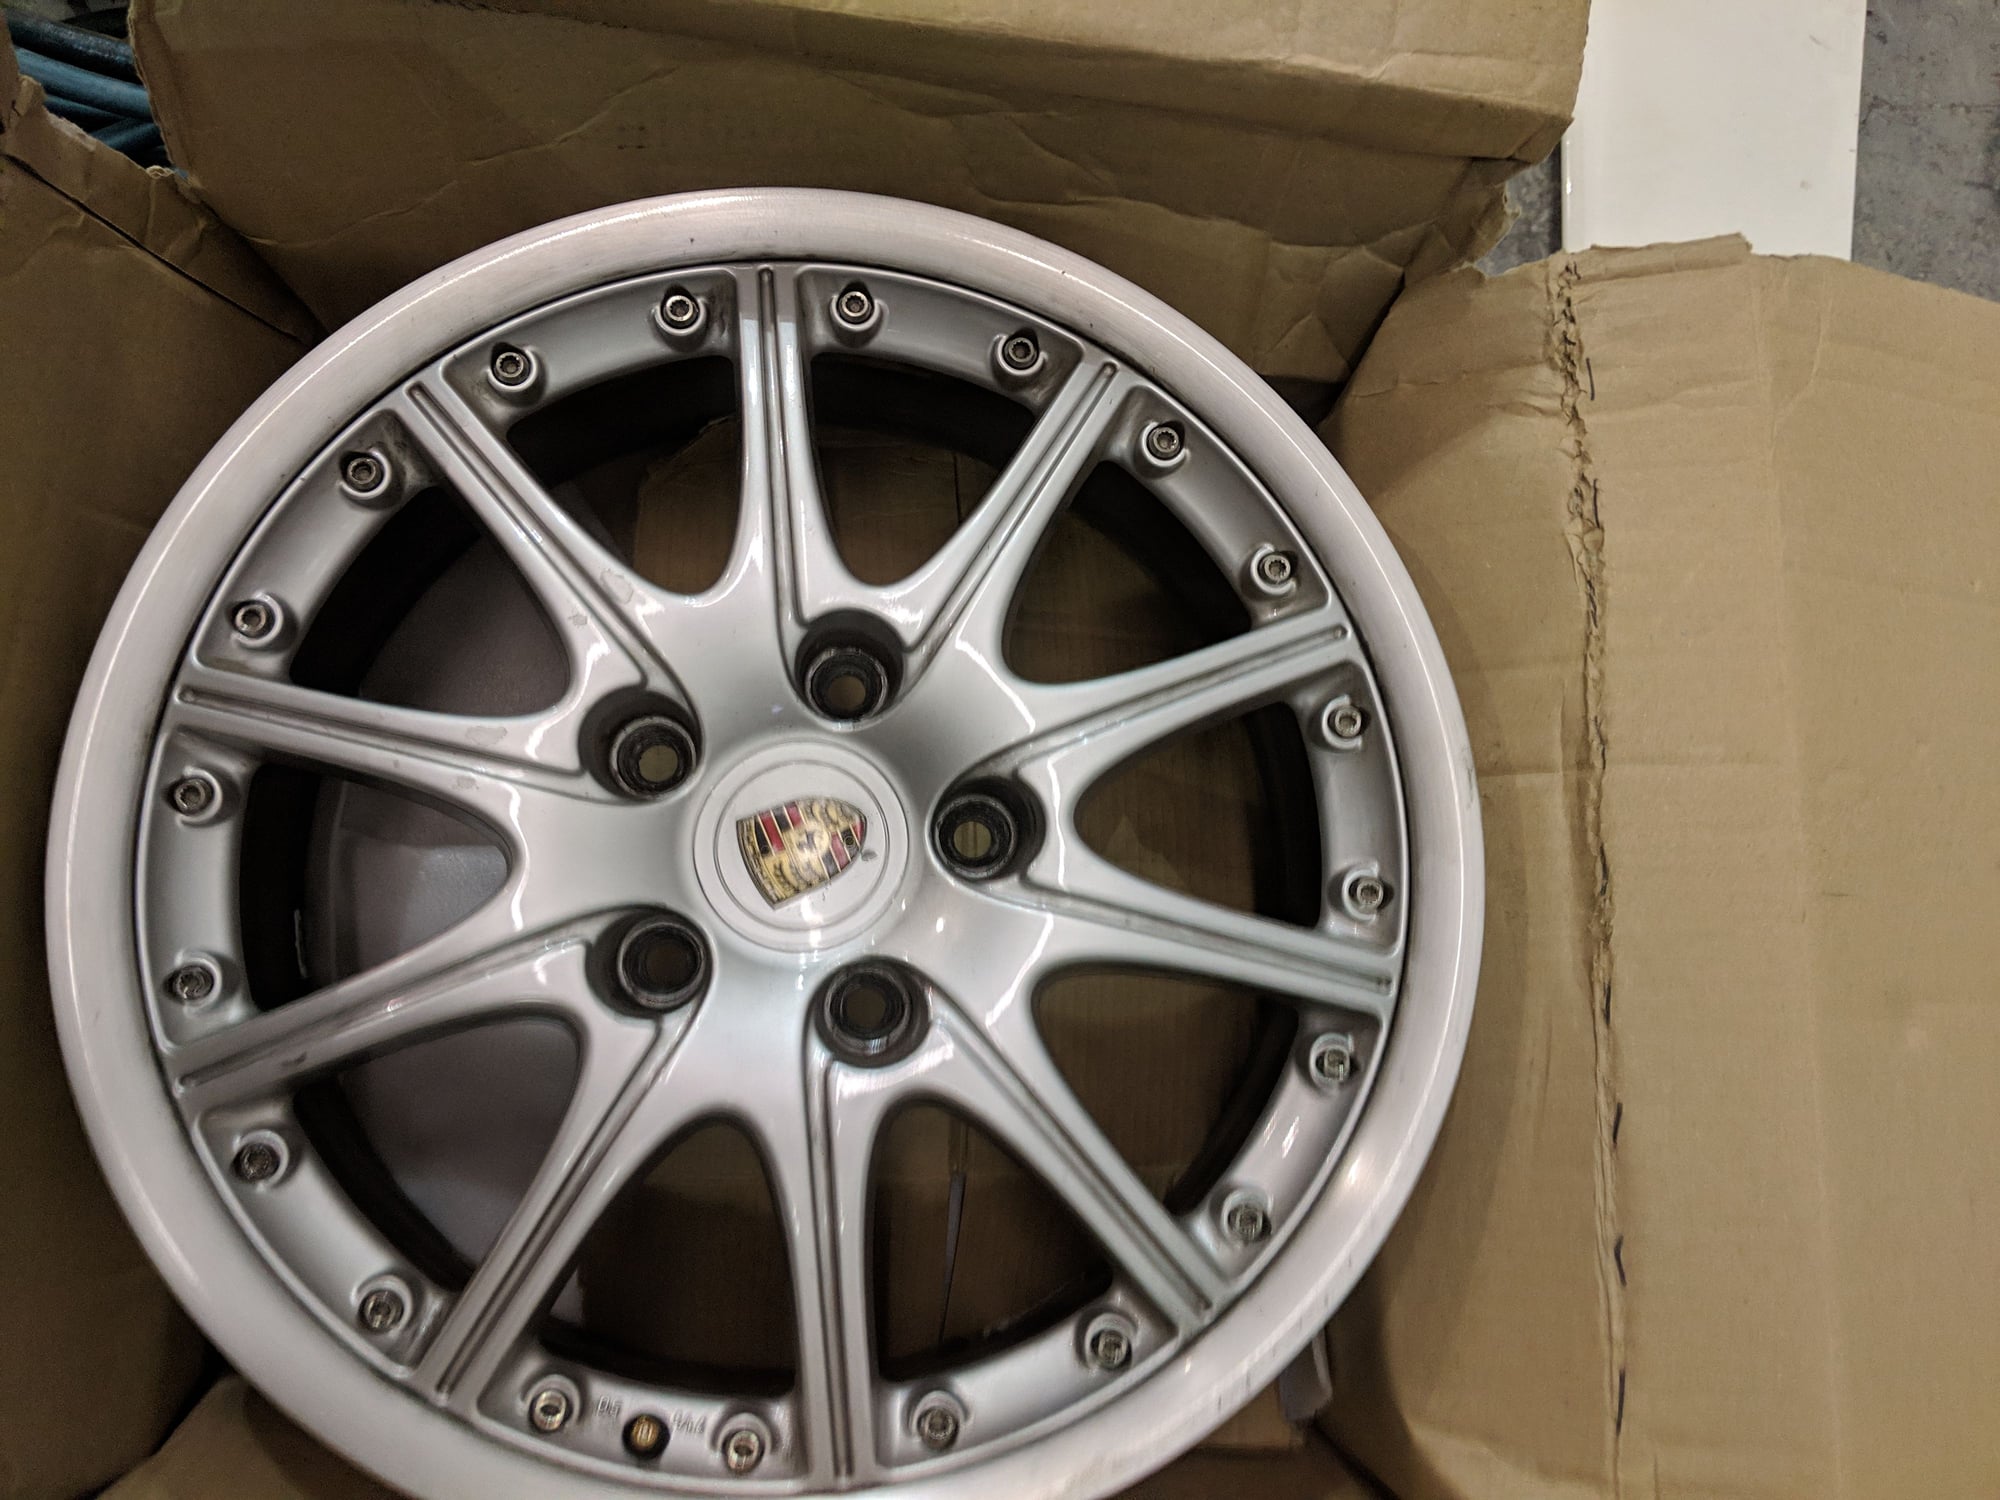 Wheels and Tires/Axles - 996 Sport Design BBS wheels - Used - 1999 to 2004 Porsche 911 - Wellesley Hills, MA 02481, United States